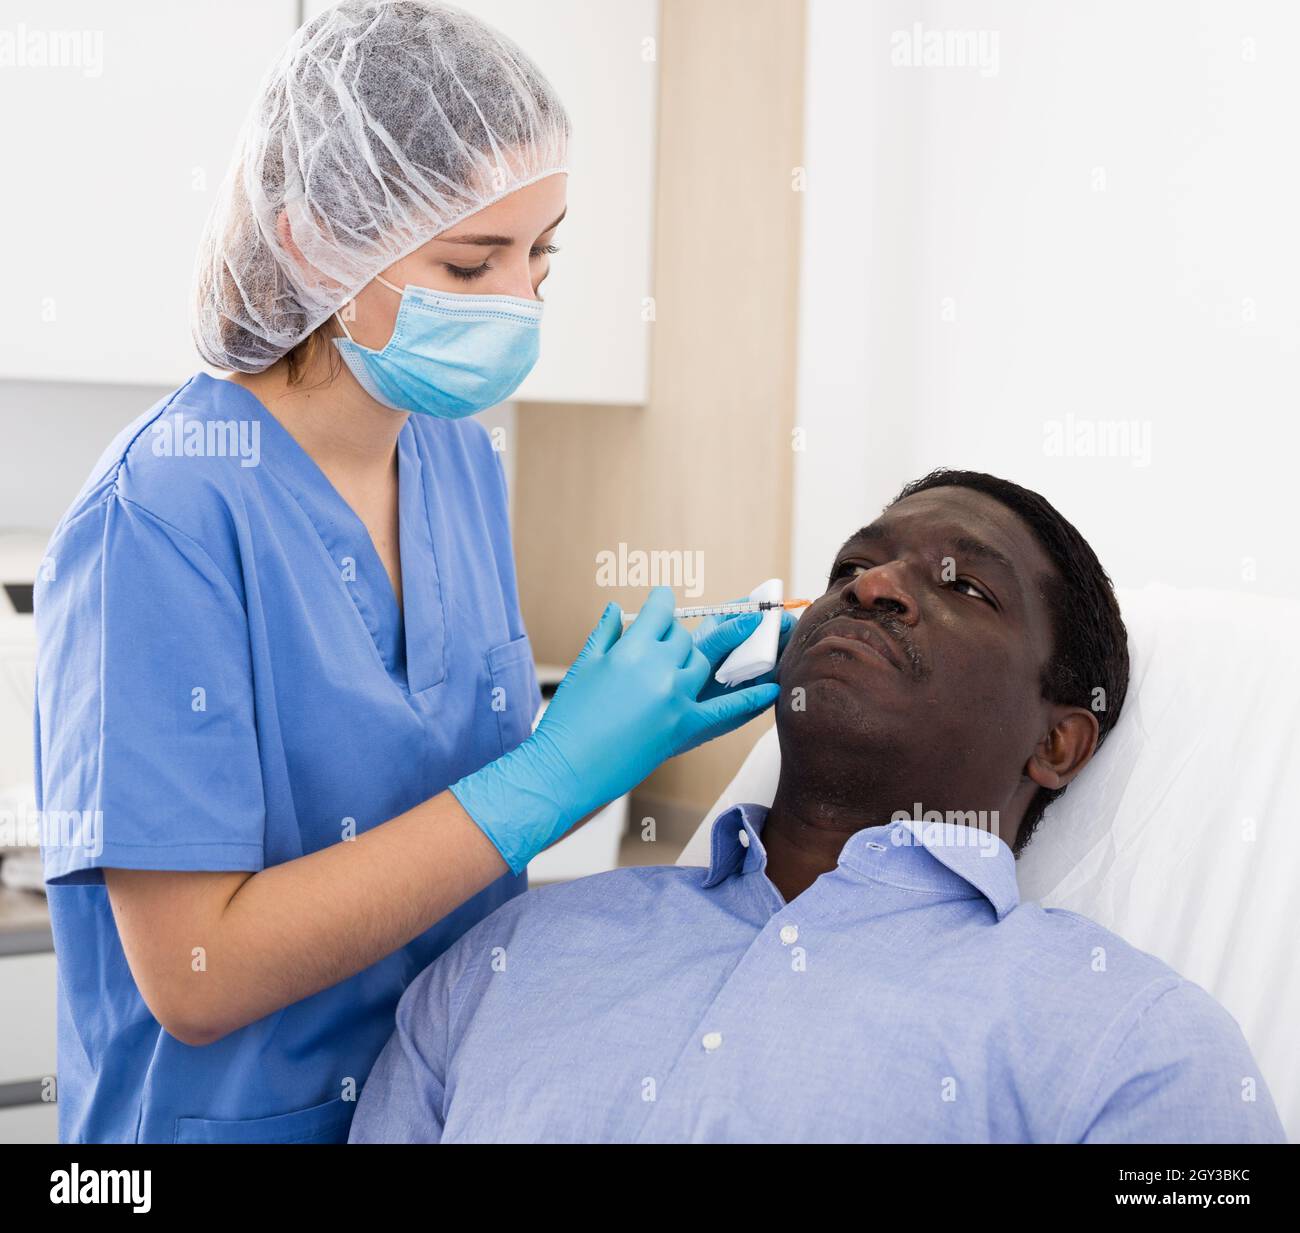 Man getting procedure of injection for face skin tightening Stock Photo